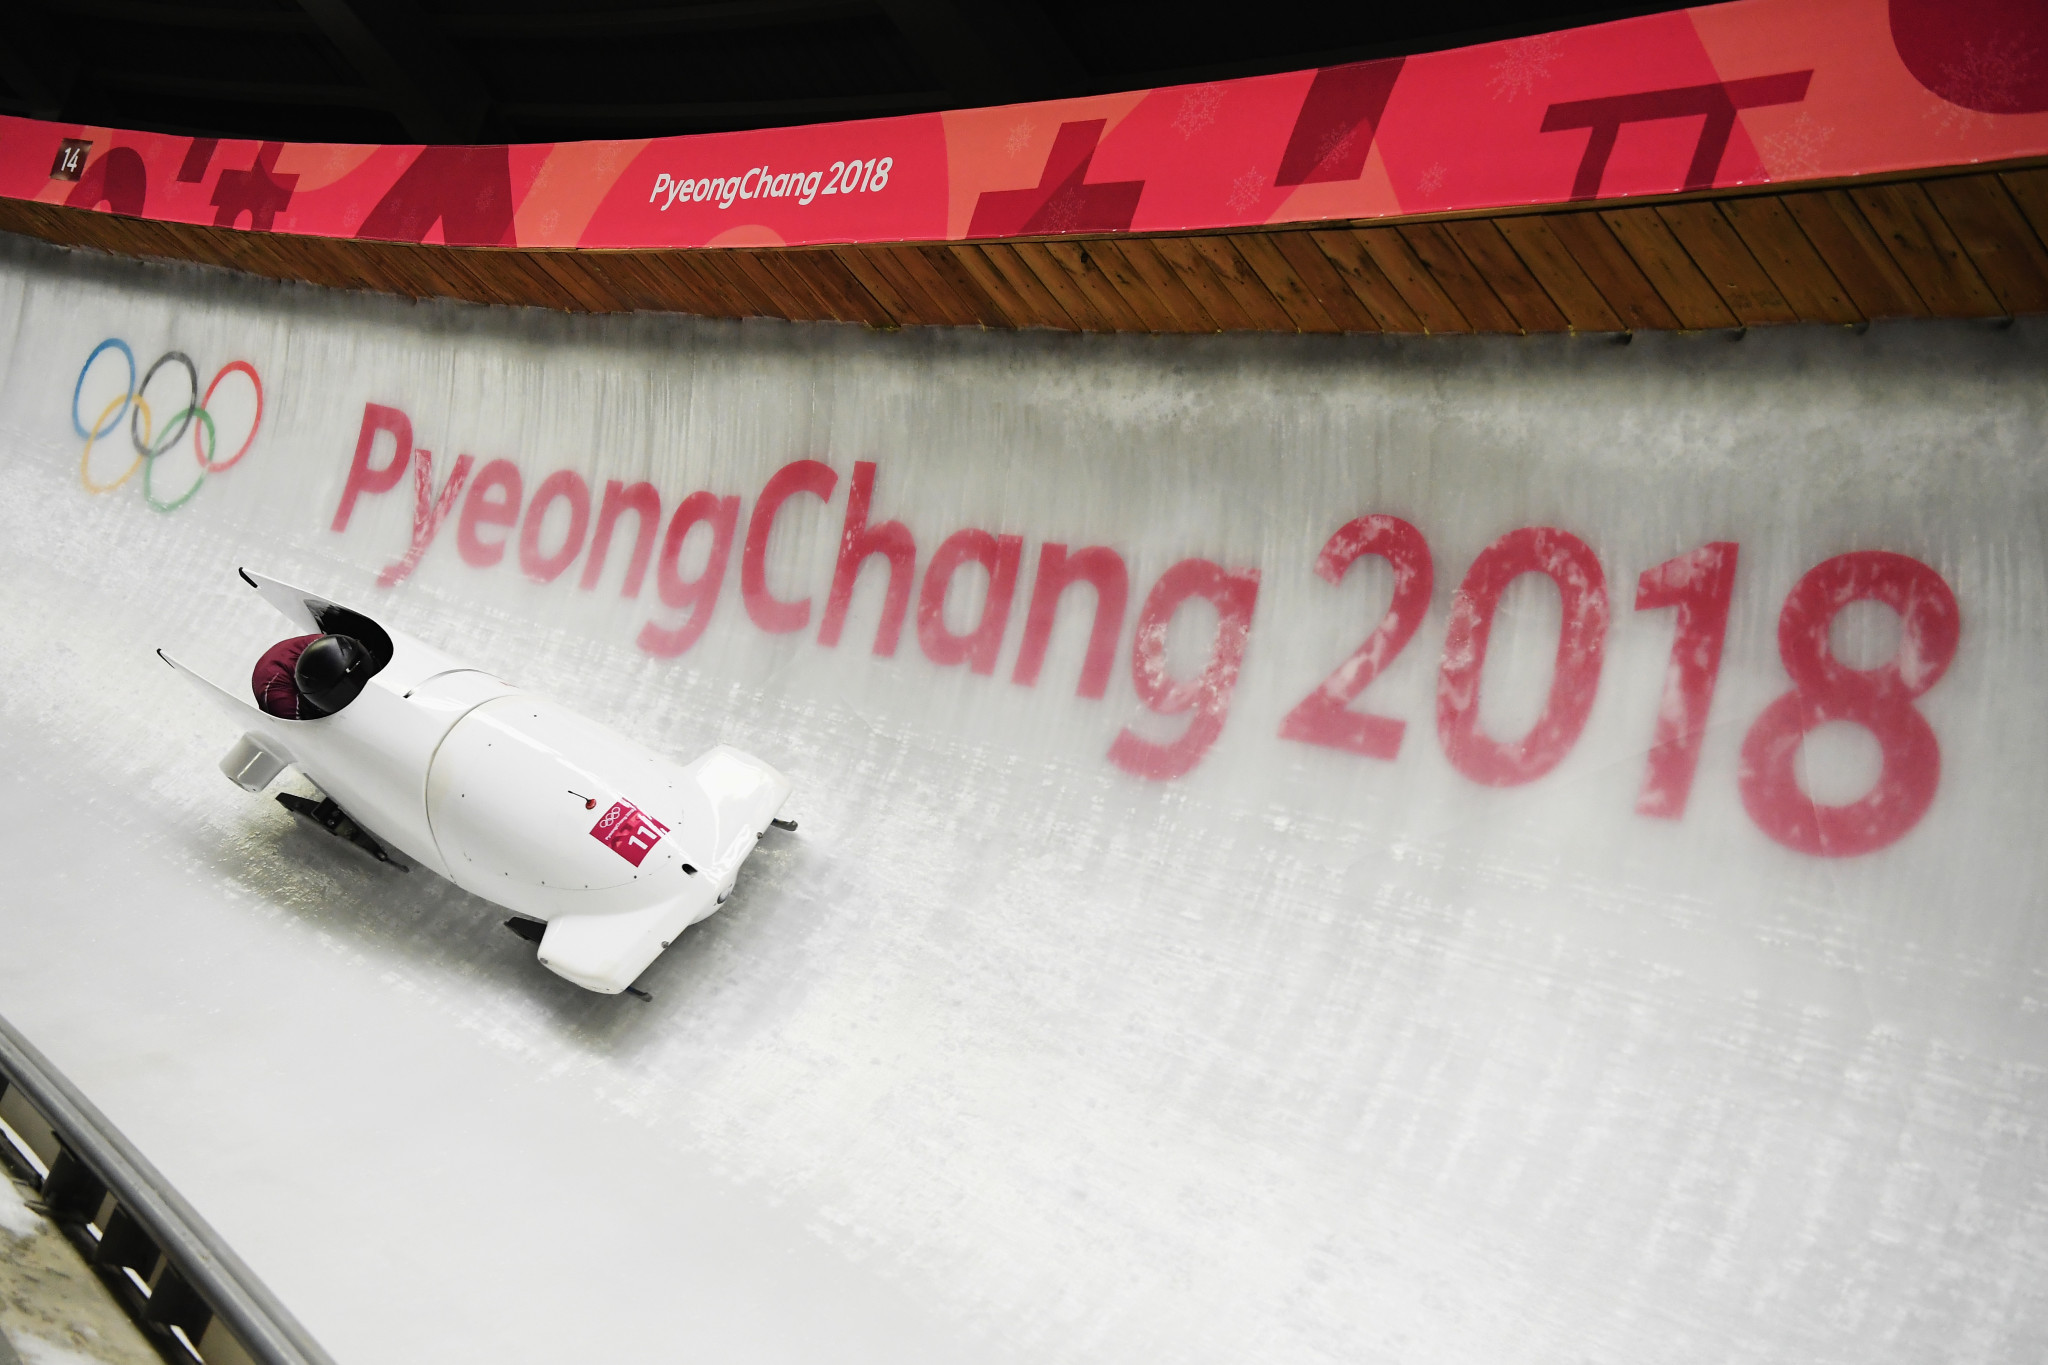 Nadezhda Sergeeva, together with pilot Anastasia Kocherzhova, finished 12th at Pyeongchang 2018 but the result was annulled following the positive drugs test ©Getty Images